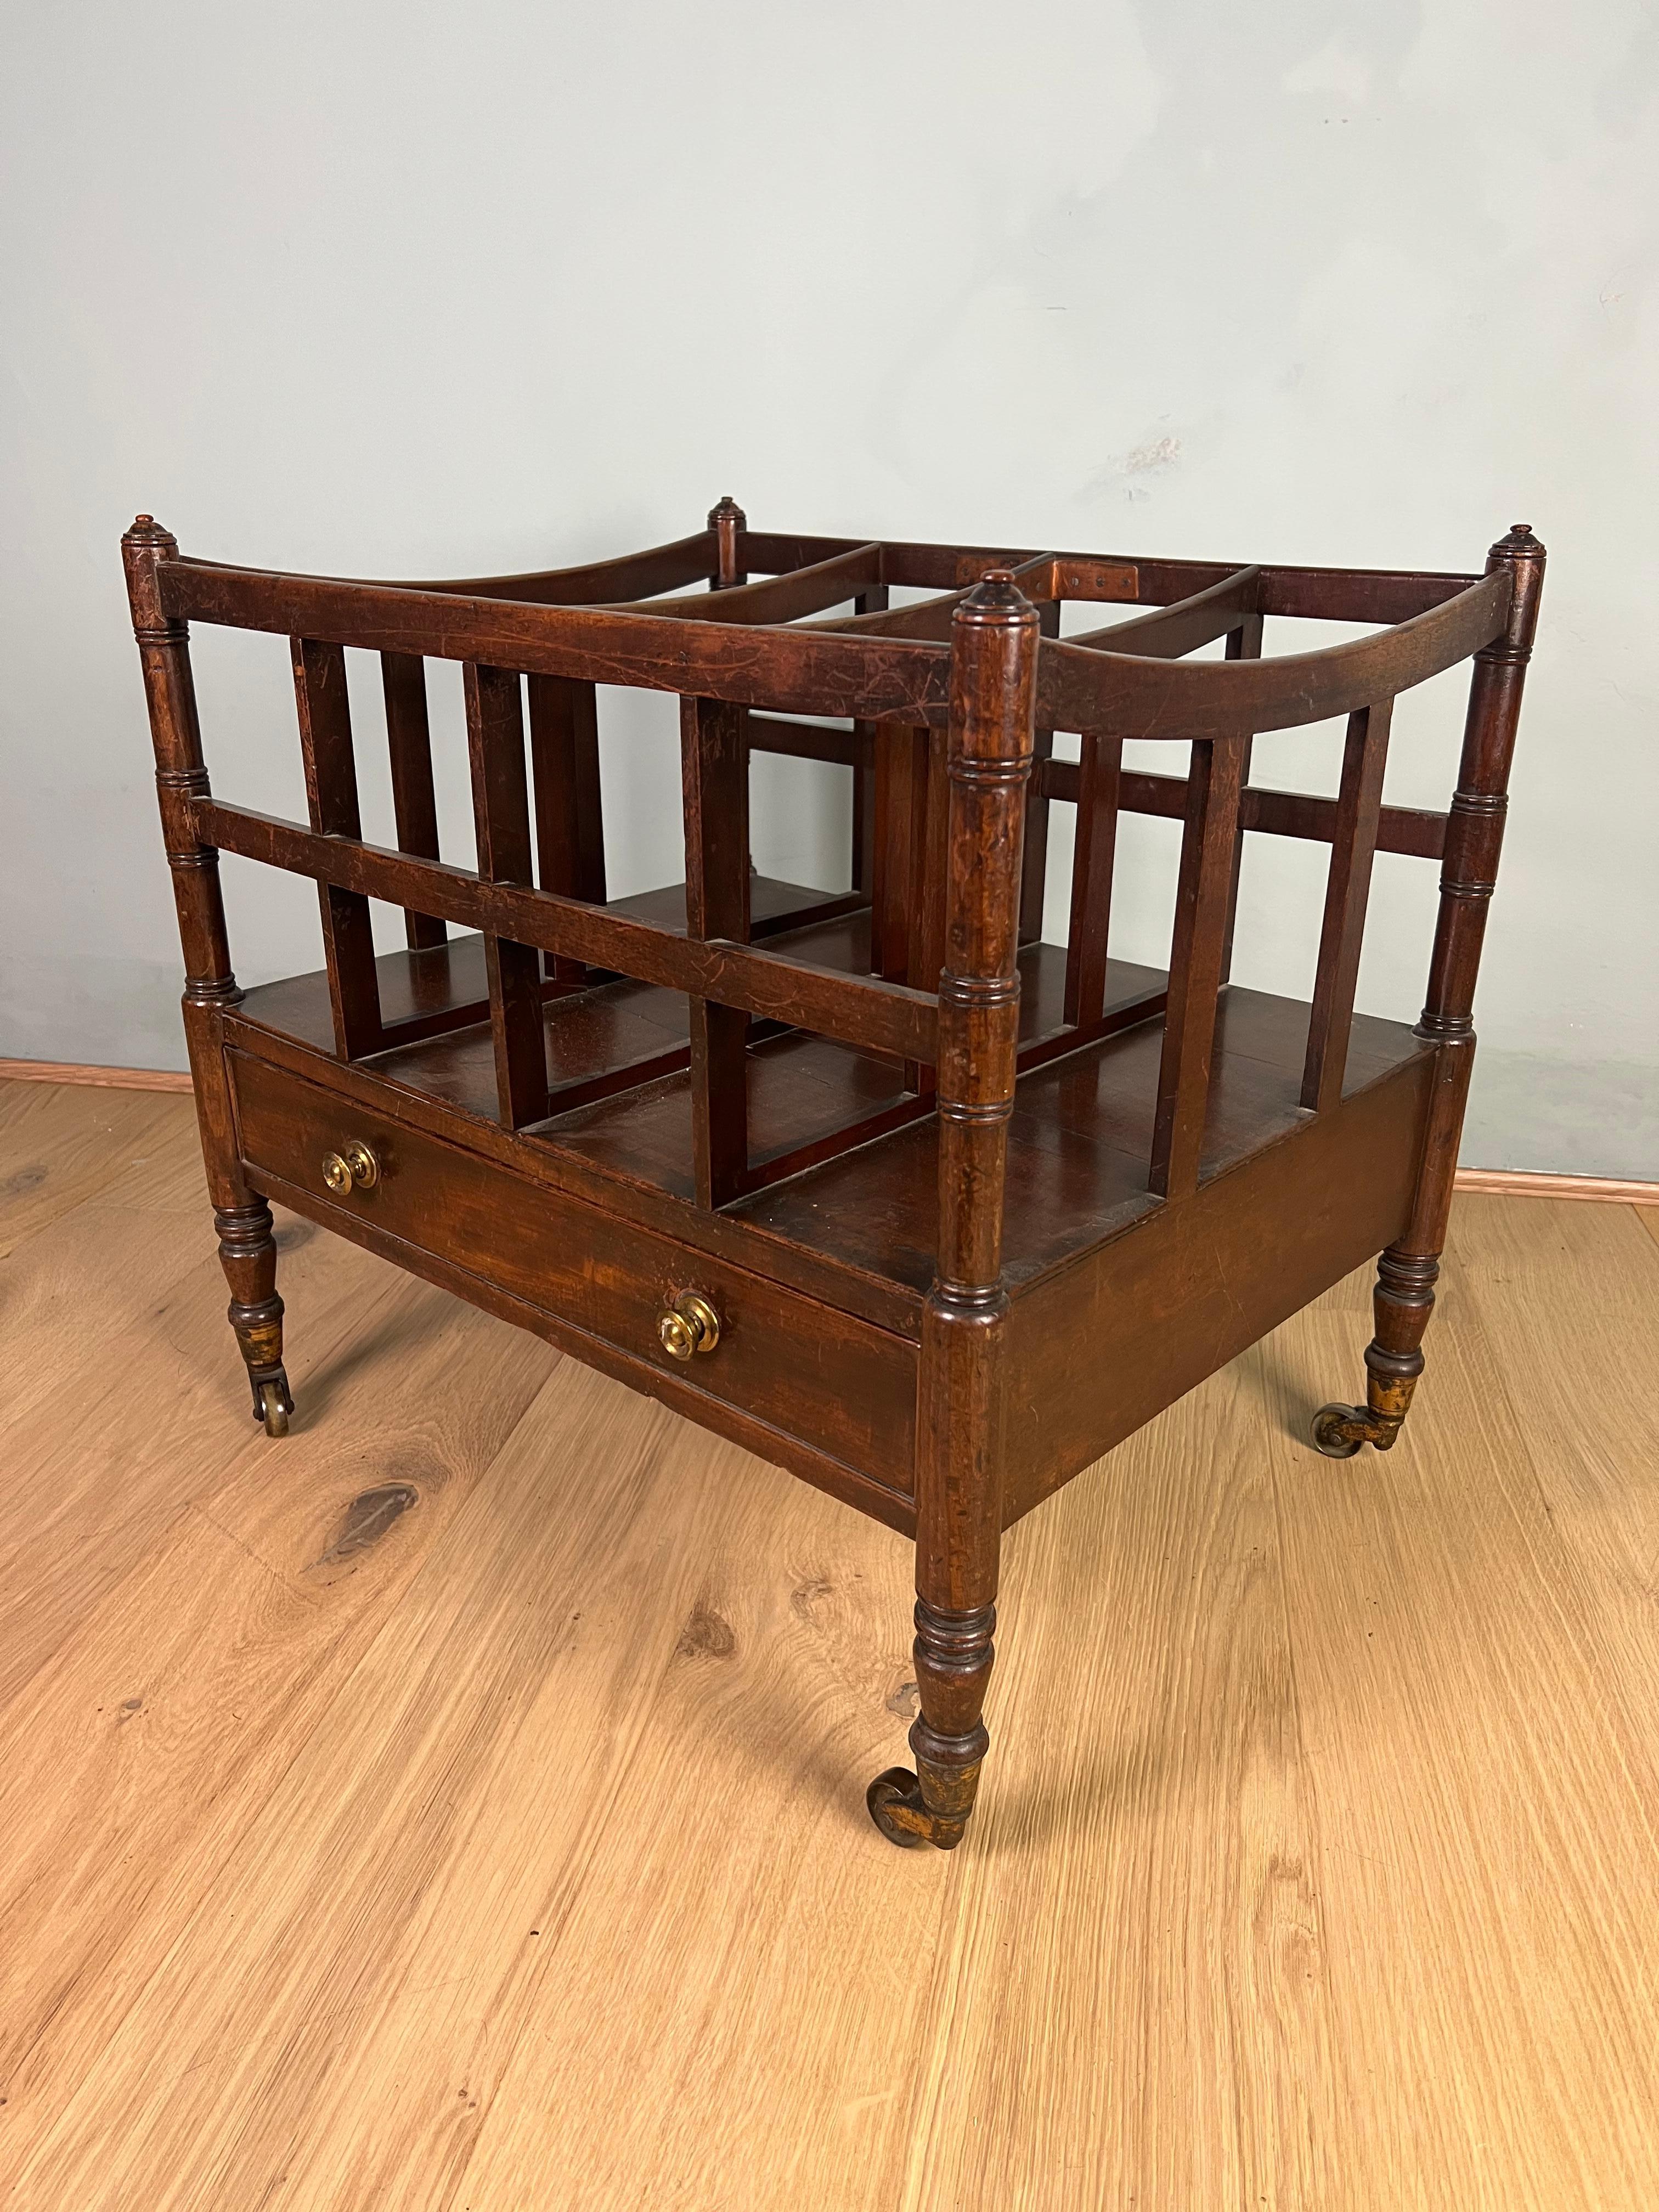 Mahogany Canterbury of good scale, fine turned legs finishing on brass cup casters, making it easy to move around. This large Canterbury has four slatted divisions, so plenty of space for papers and magazines. Below the divisions is a single drawer